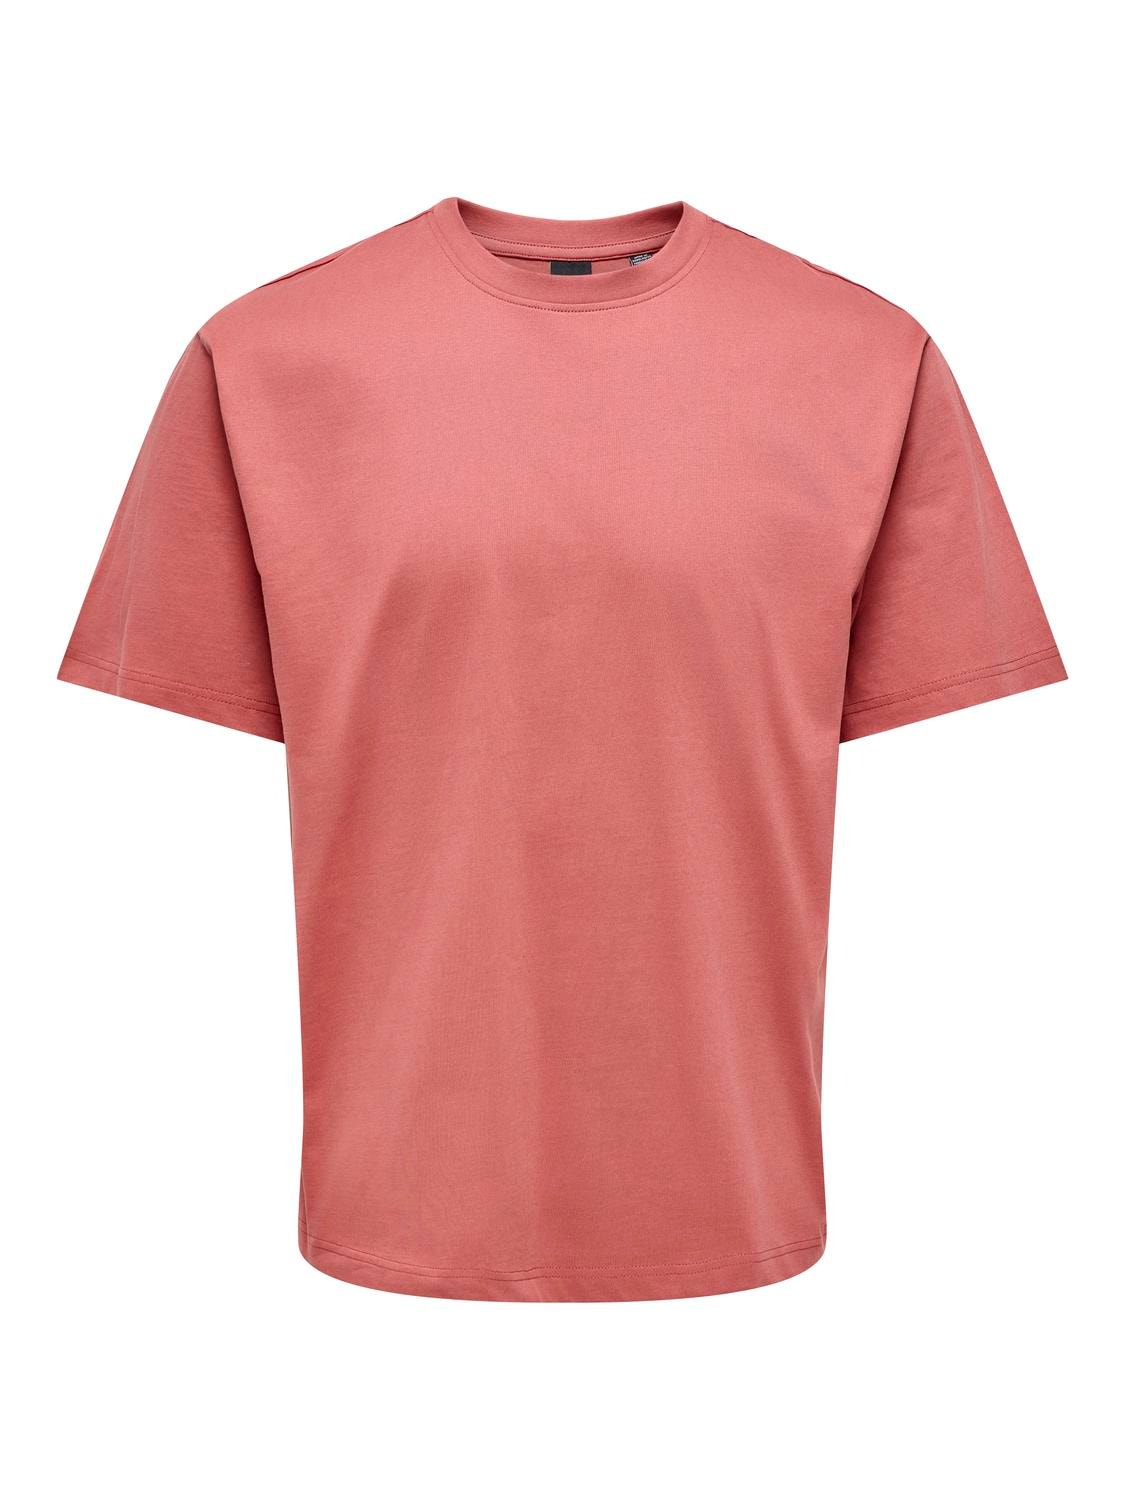 ONLY & SONS Relaxed Fit Round Neck T-Shirt -Dusty Cedar - 22022532